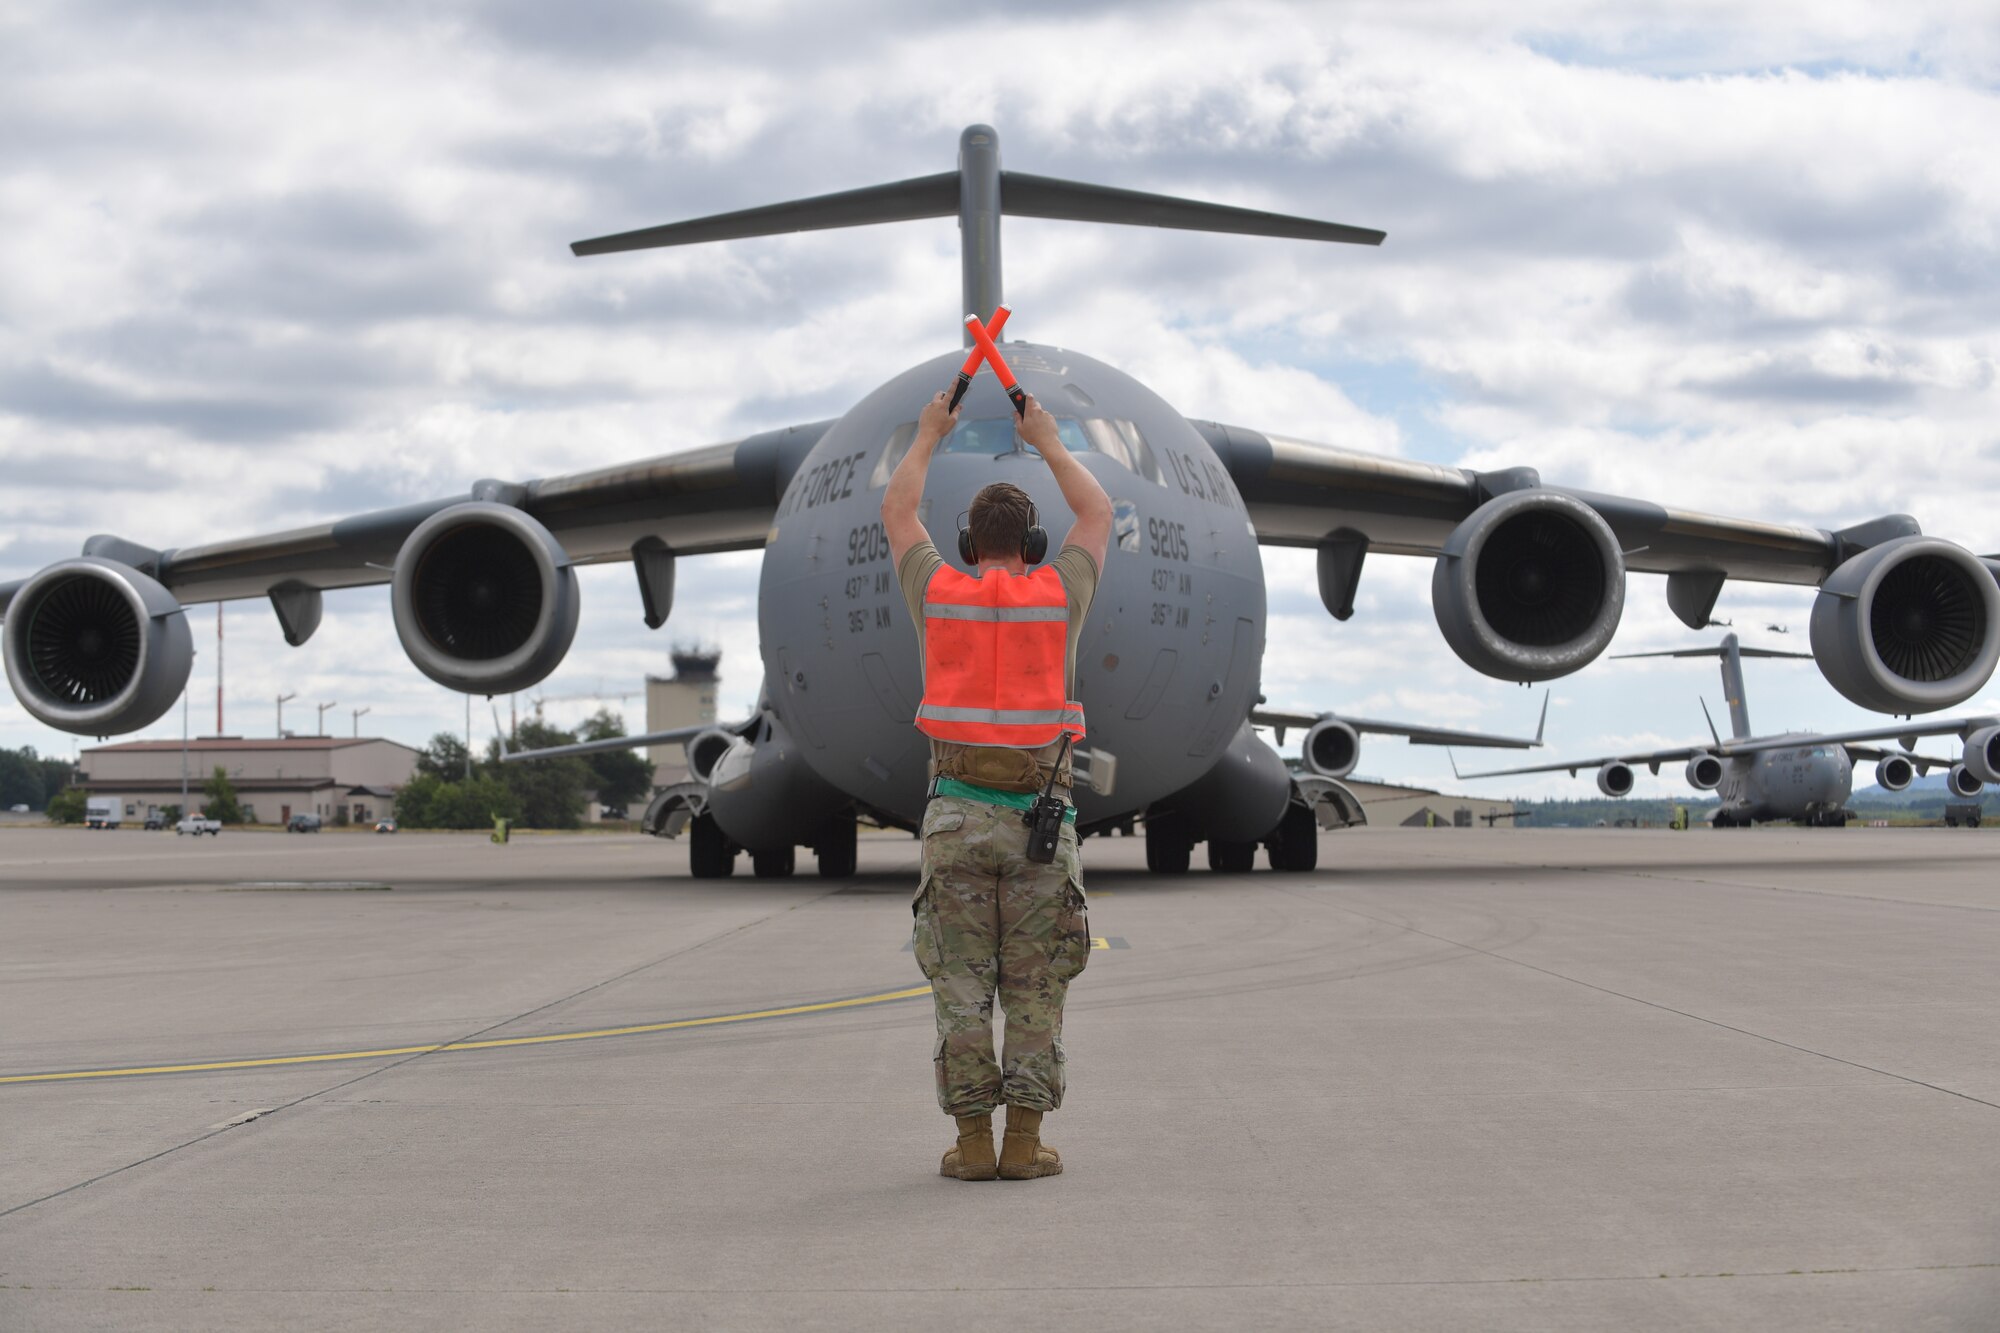 A 721st Aircraft Maintenance Squadron Airman marshalls a C-17 Globemaster III aircraft following the first-ever operational use of the Negatively Pressurized Conex to transport 12 COVID-19 patients to Ramstein Air Base, Germany, July 1, 2020. The NPC is the latest isolated containment chamber developed to transport up to 28 individuals with infectious diseases. (U.S. Air Force photo by Airman 1st Class John R. Wright)